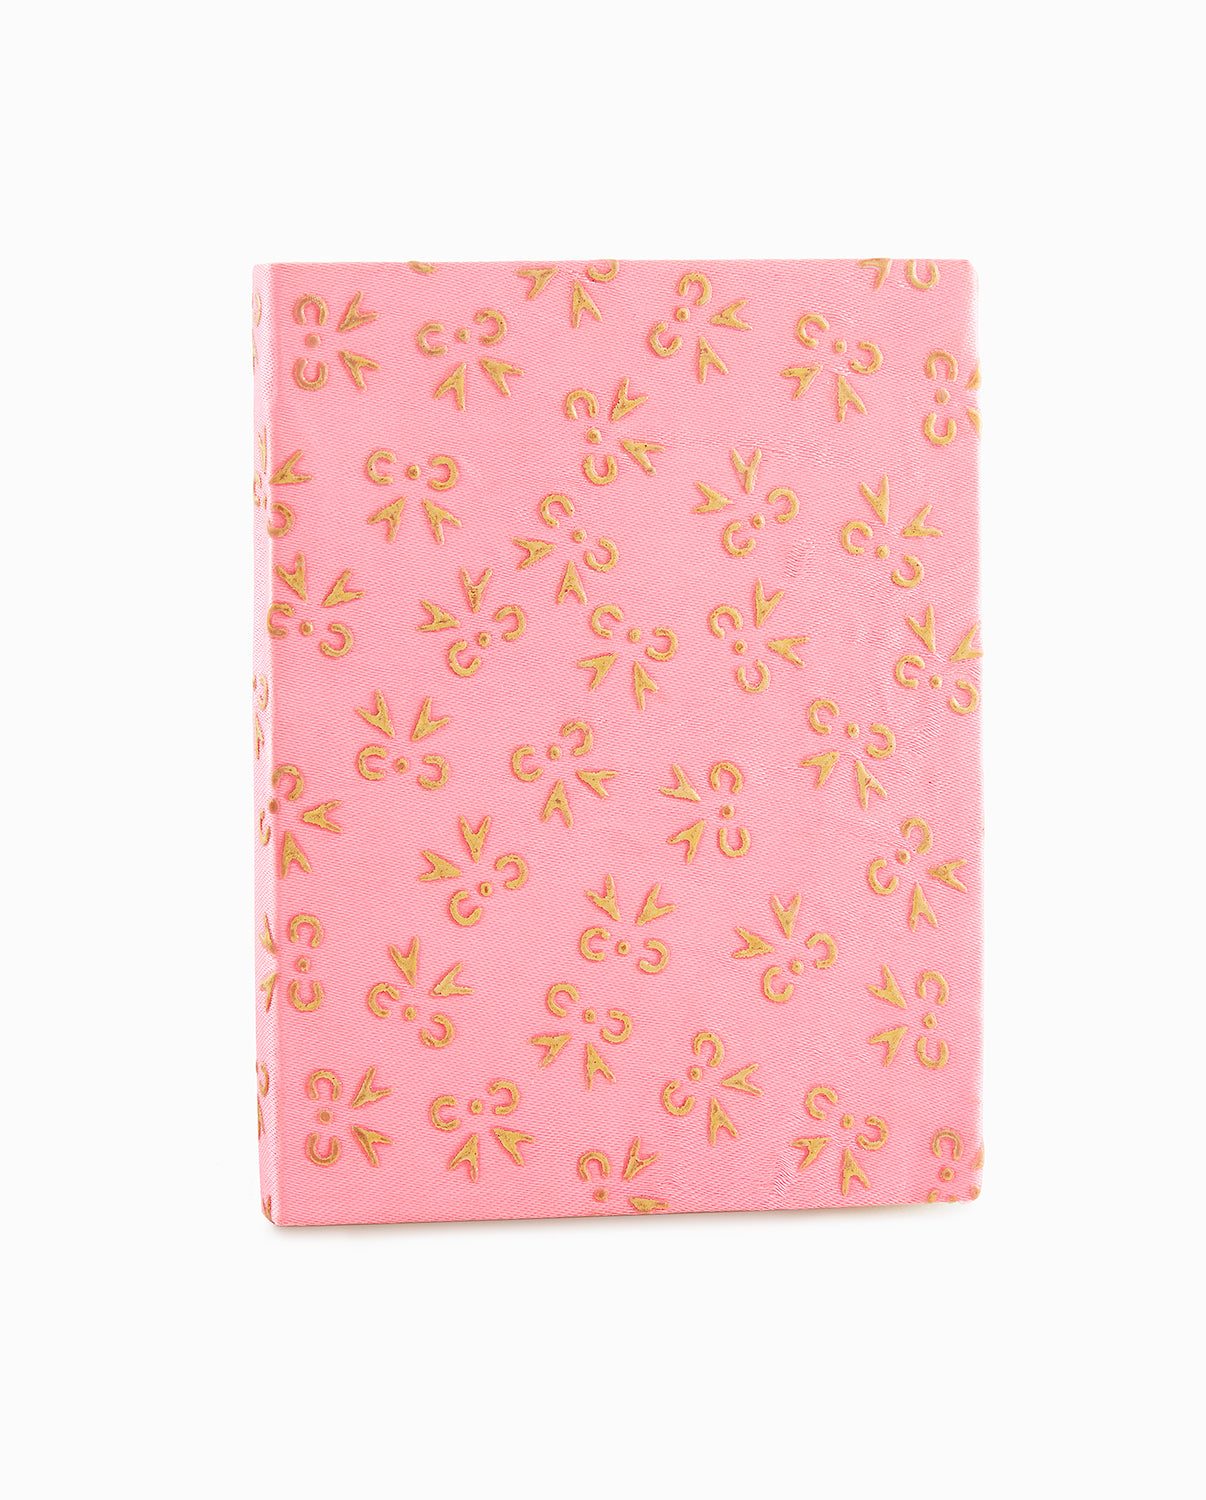 Rose Pink with Ethnic Design Diary Cloth with Diary -Upcycled Diary!